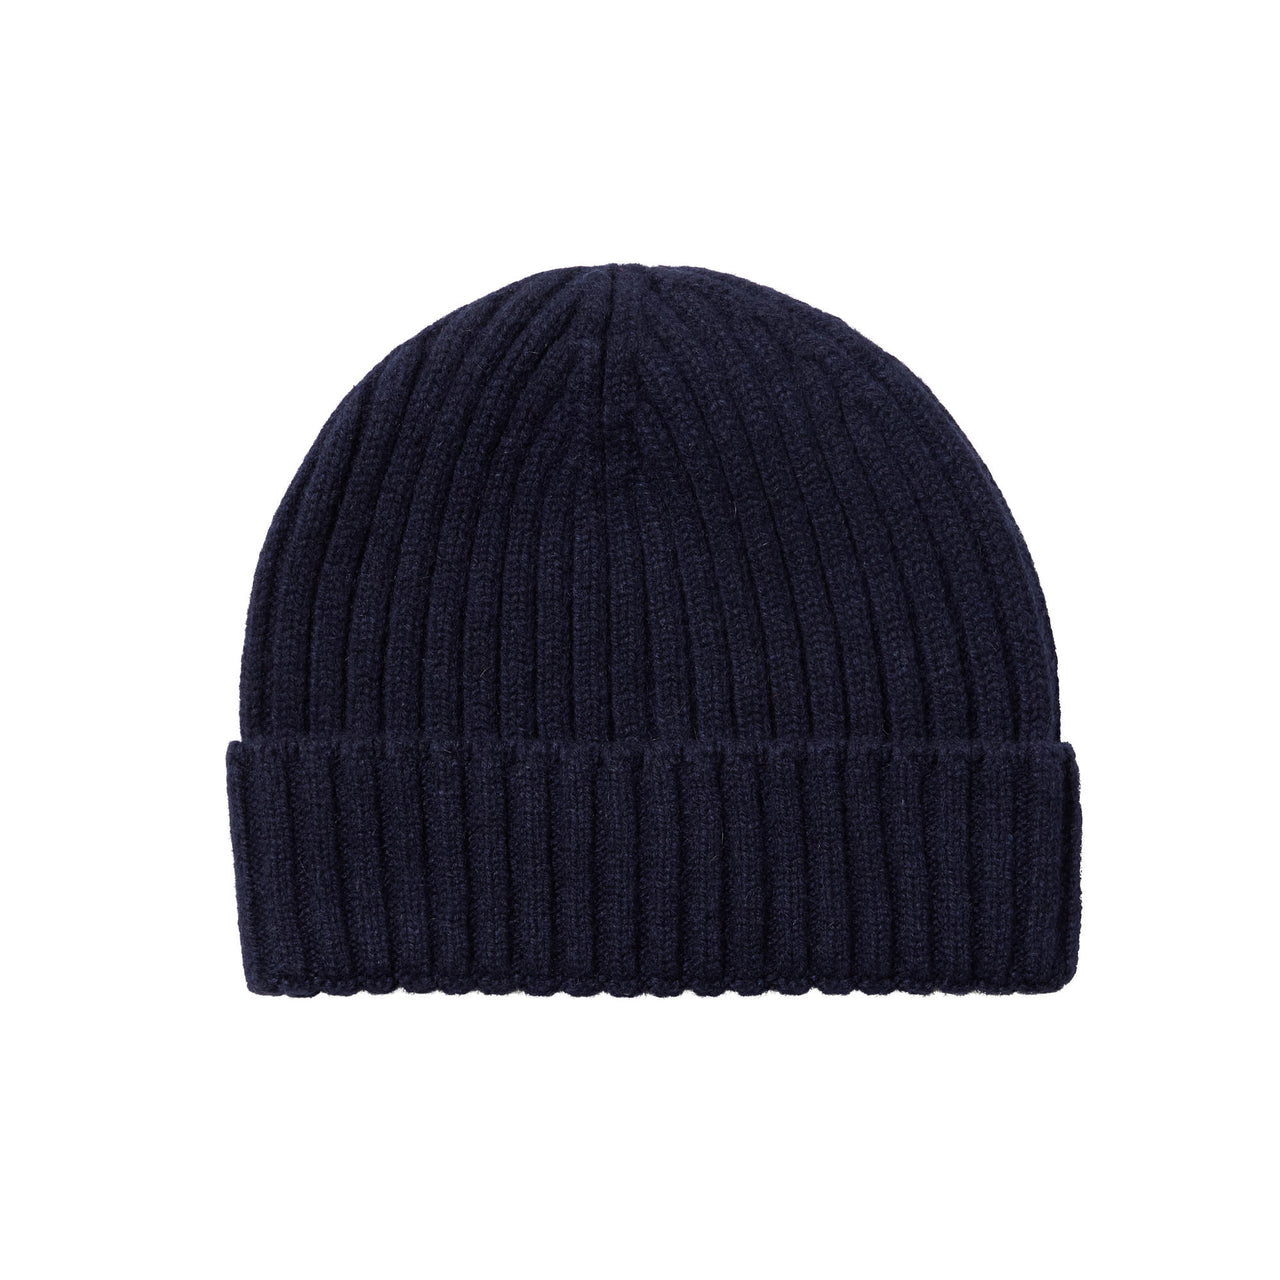 HENRY SARTORIAL X CANTINI Cashmere Beanie NAVY